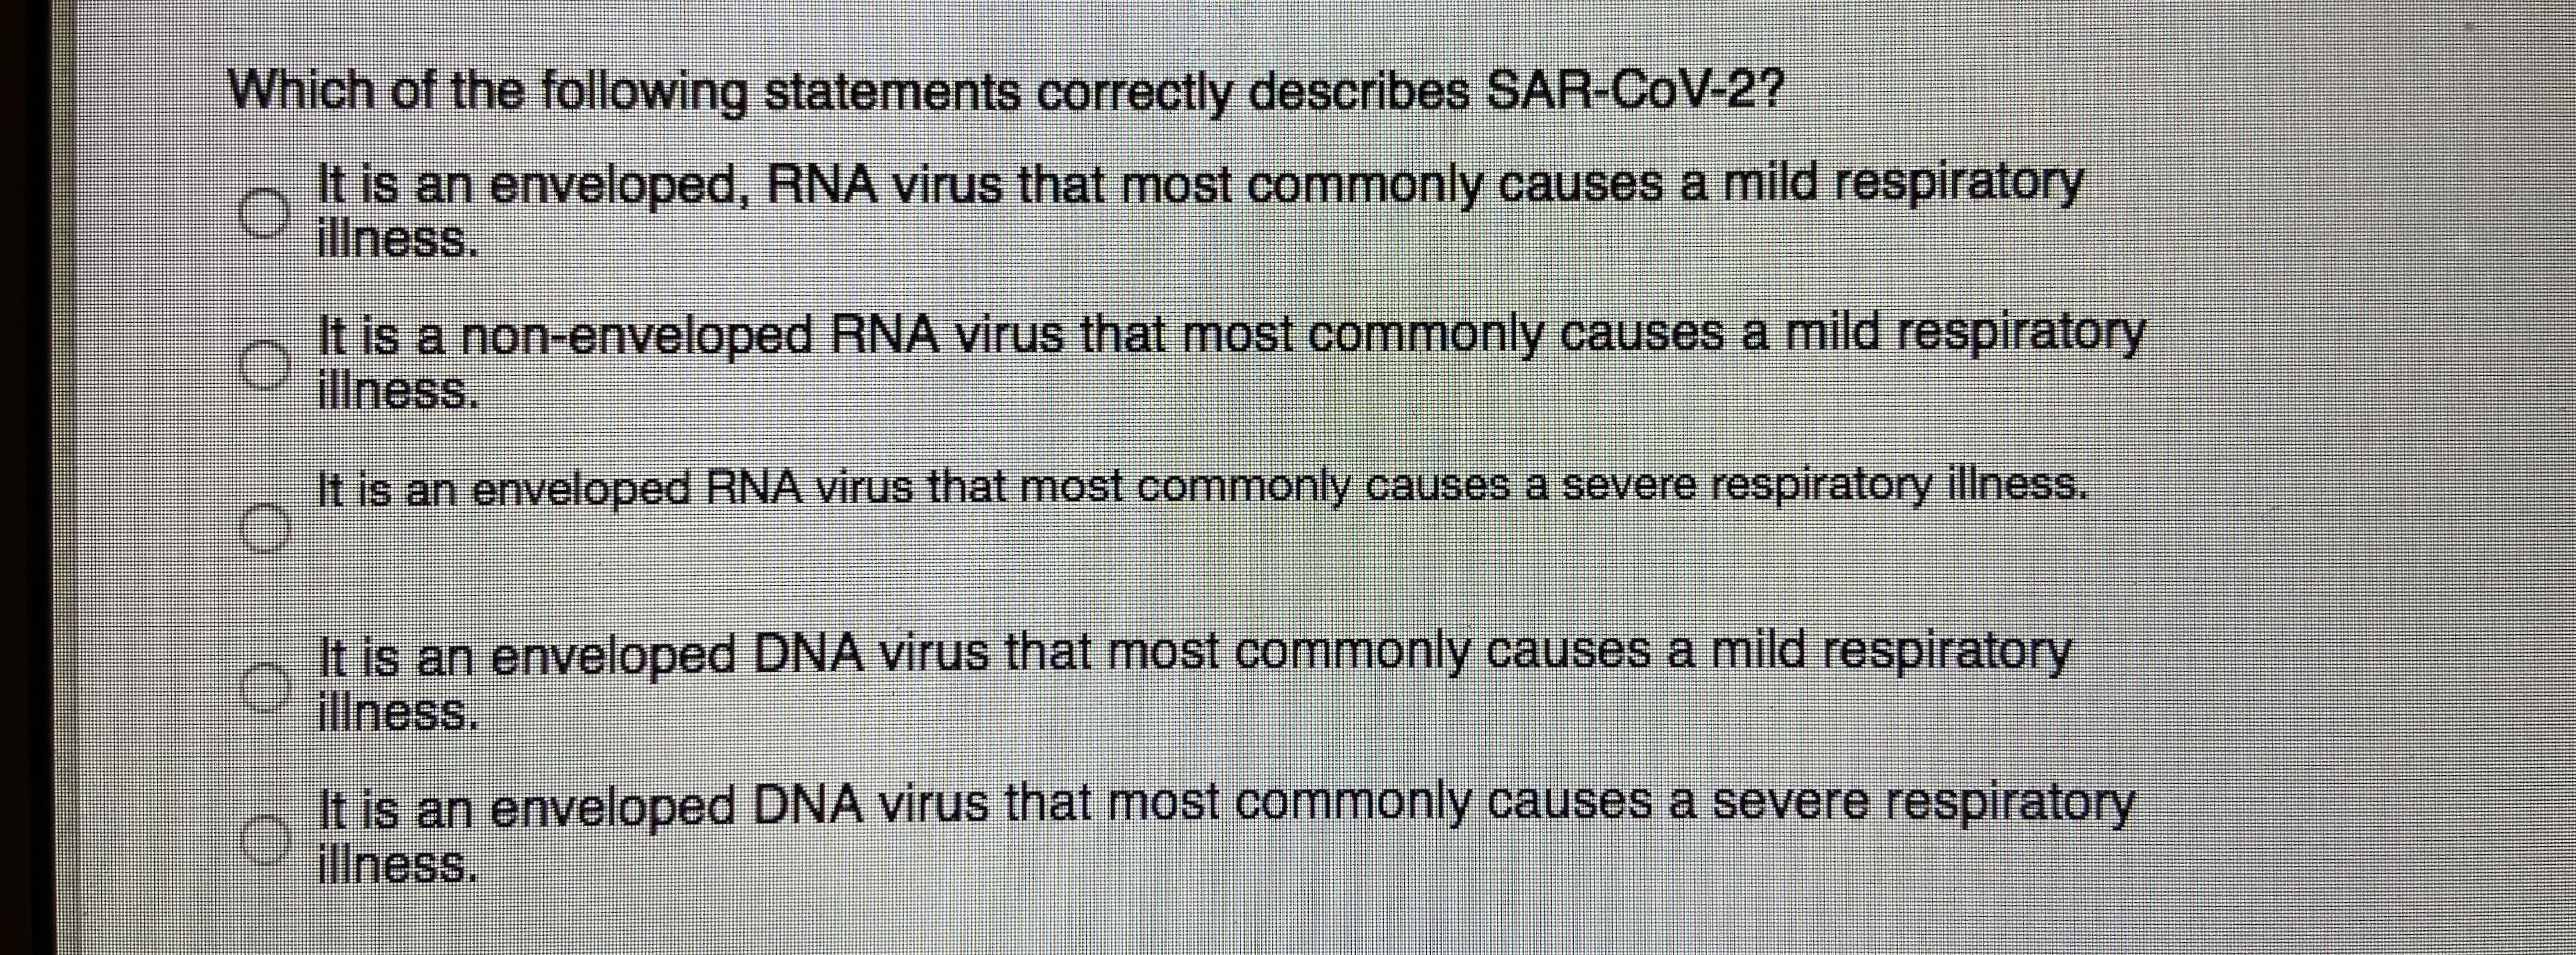 Which of the following statements correctly describes SAR-CoV-2?
It is an enveloped, RNA virus that most commonly causes a mild respiratory
illness.
It is a non-enveloped RNA virus that most commonly causes a mild respiratory
illness.
It is an enveloped RNA virus that most commonly causes a severe respiratory illness.
It is an enveloped DNA virus that most commonly causes a mild respiratory
illness.
It is an enveloped DNA virus that most commonly causes a severe respiratory
illness.
